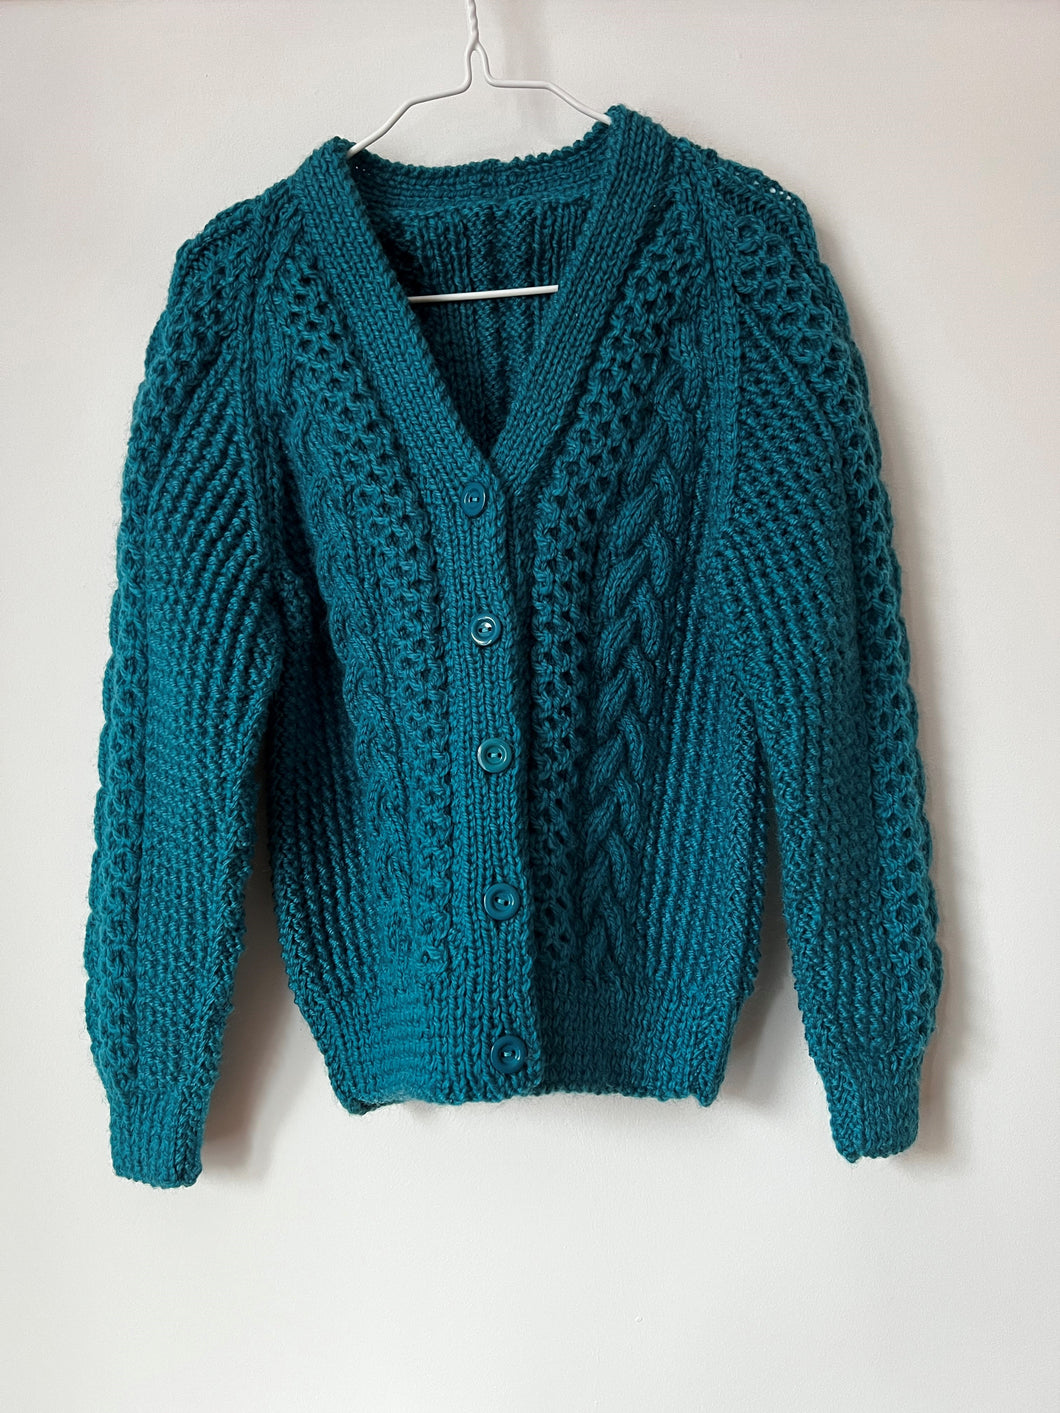 Aran Hand Knitted Cardigan - Teal Age 4-6 years